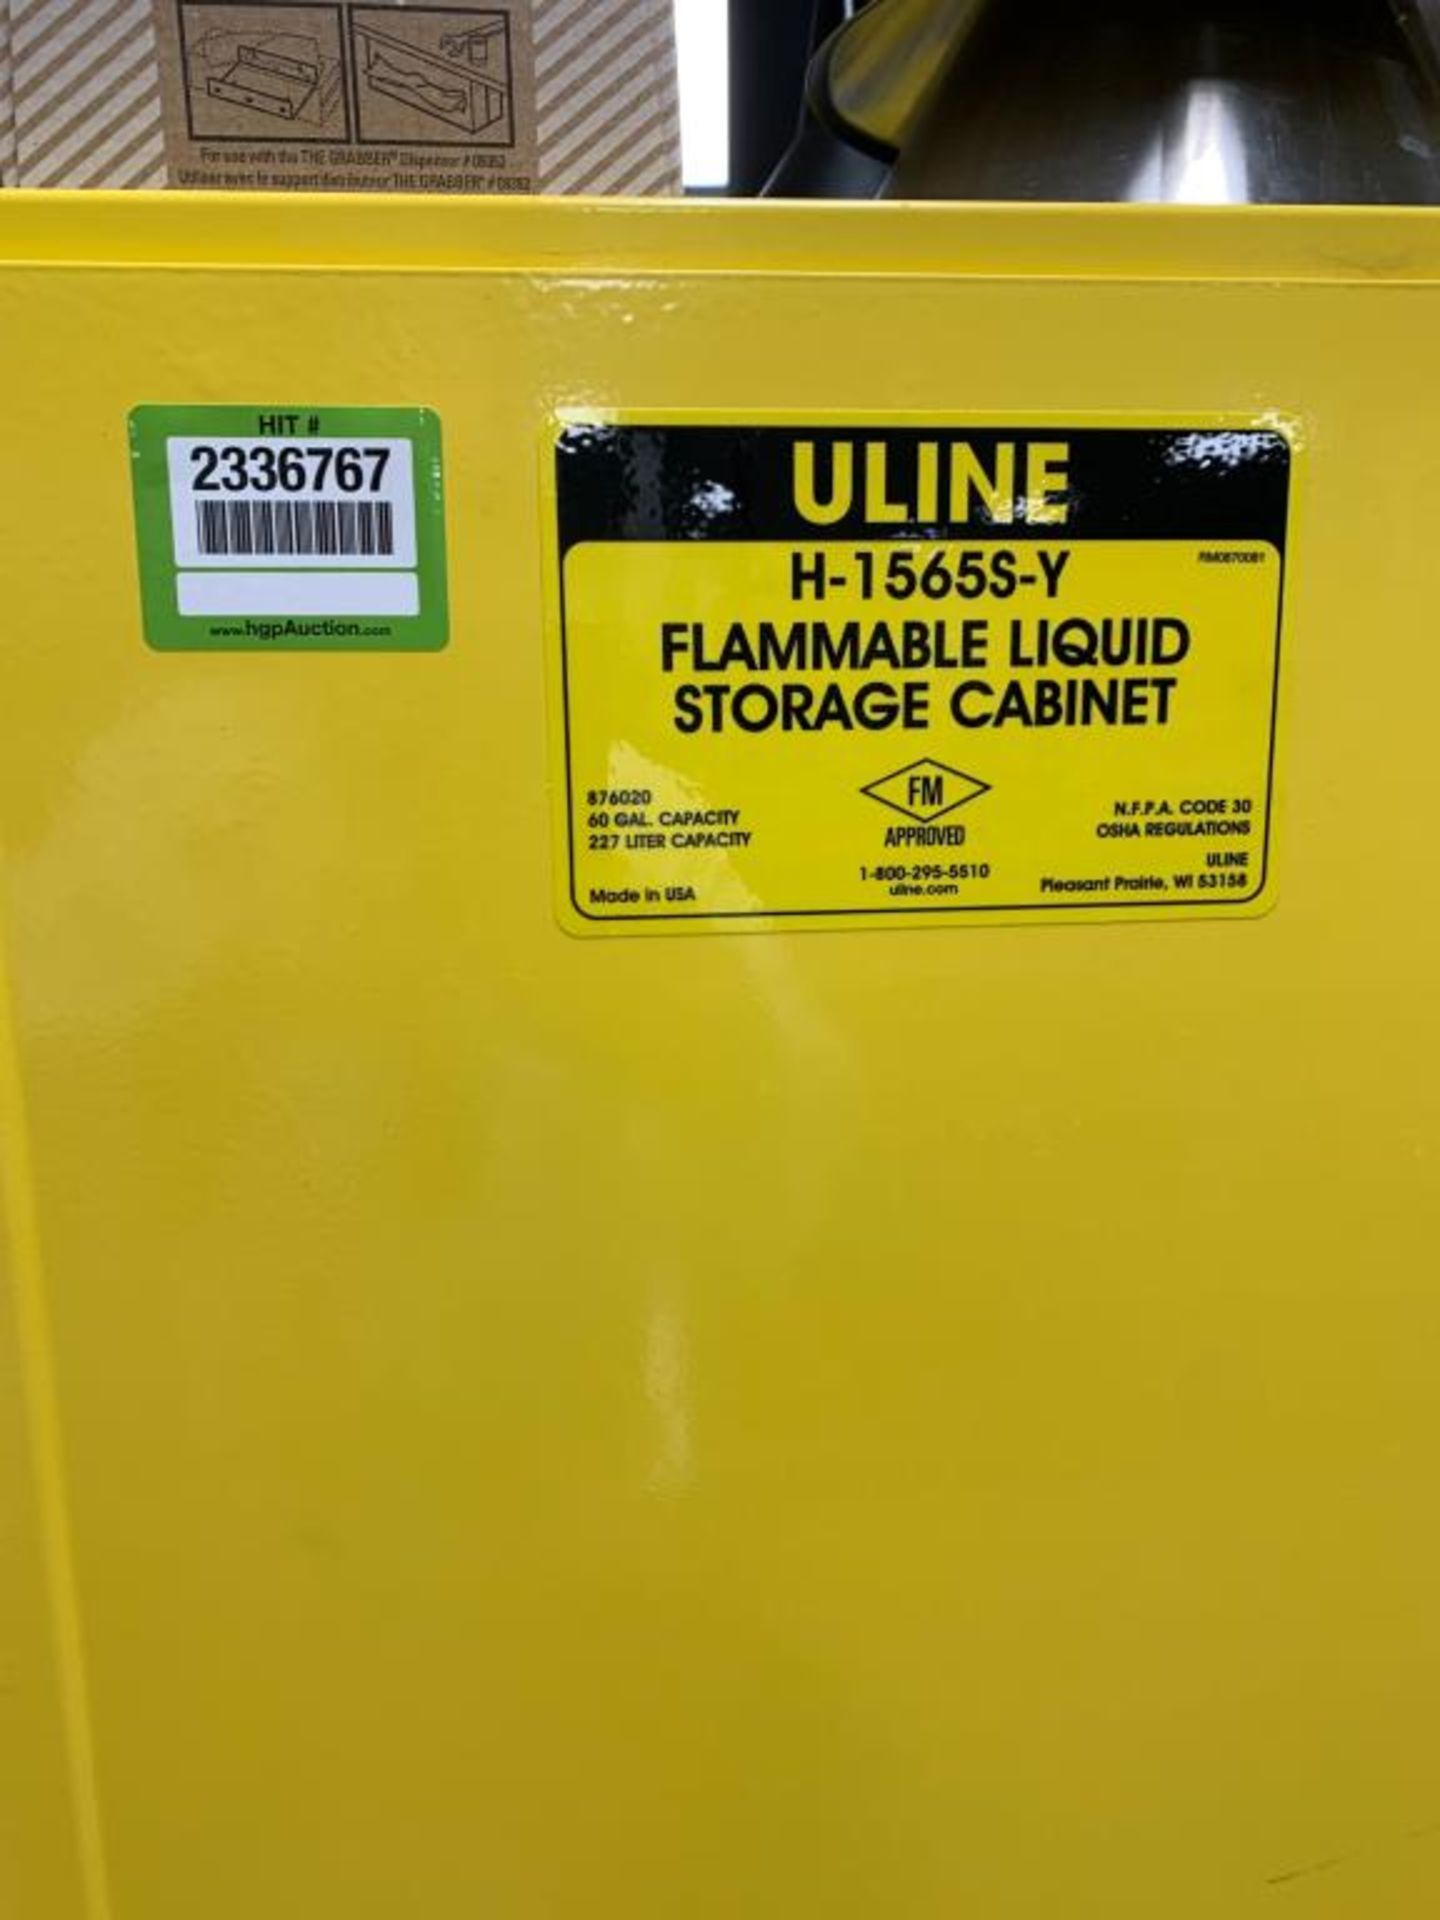 Uline Flammable Storage Cabinet - Image 2 of 3